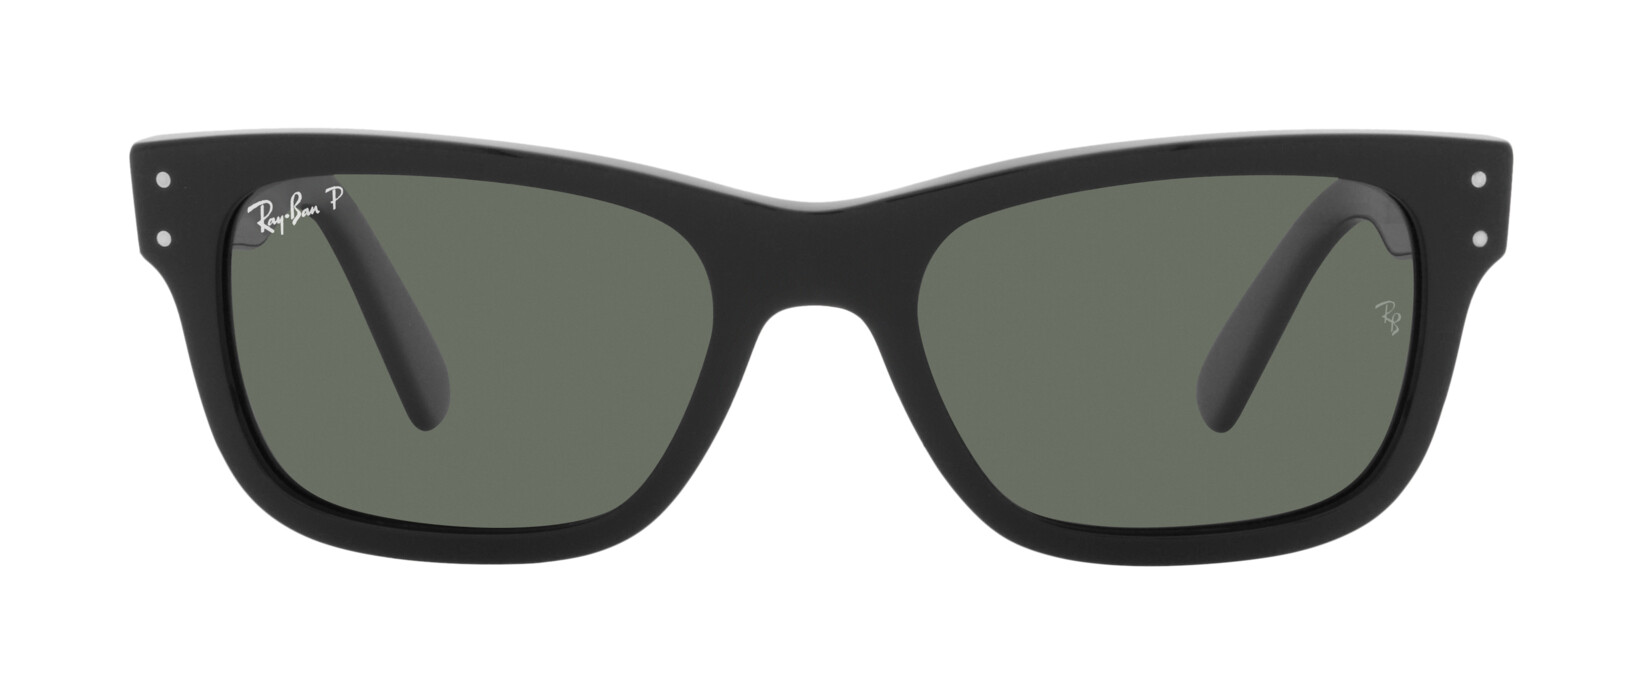 [products.image.front] Ray-Ban MR BURBANK 0RB2283 901/58 Sonnenbrille